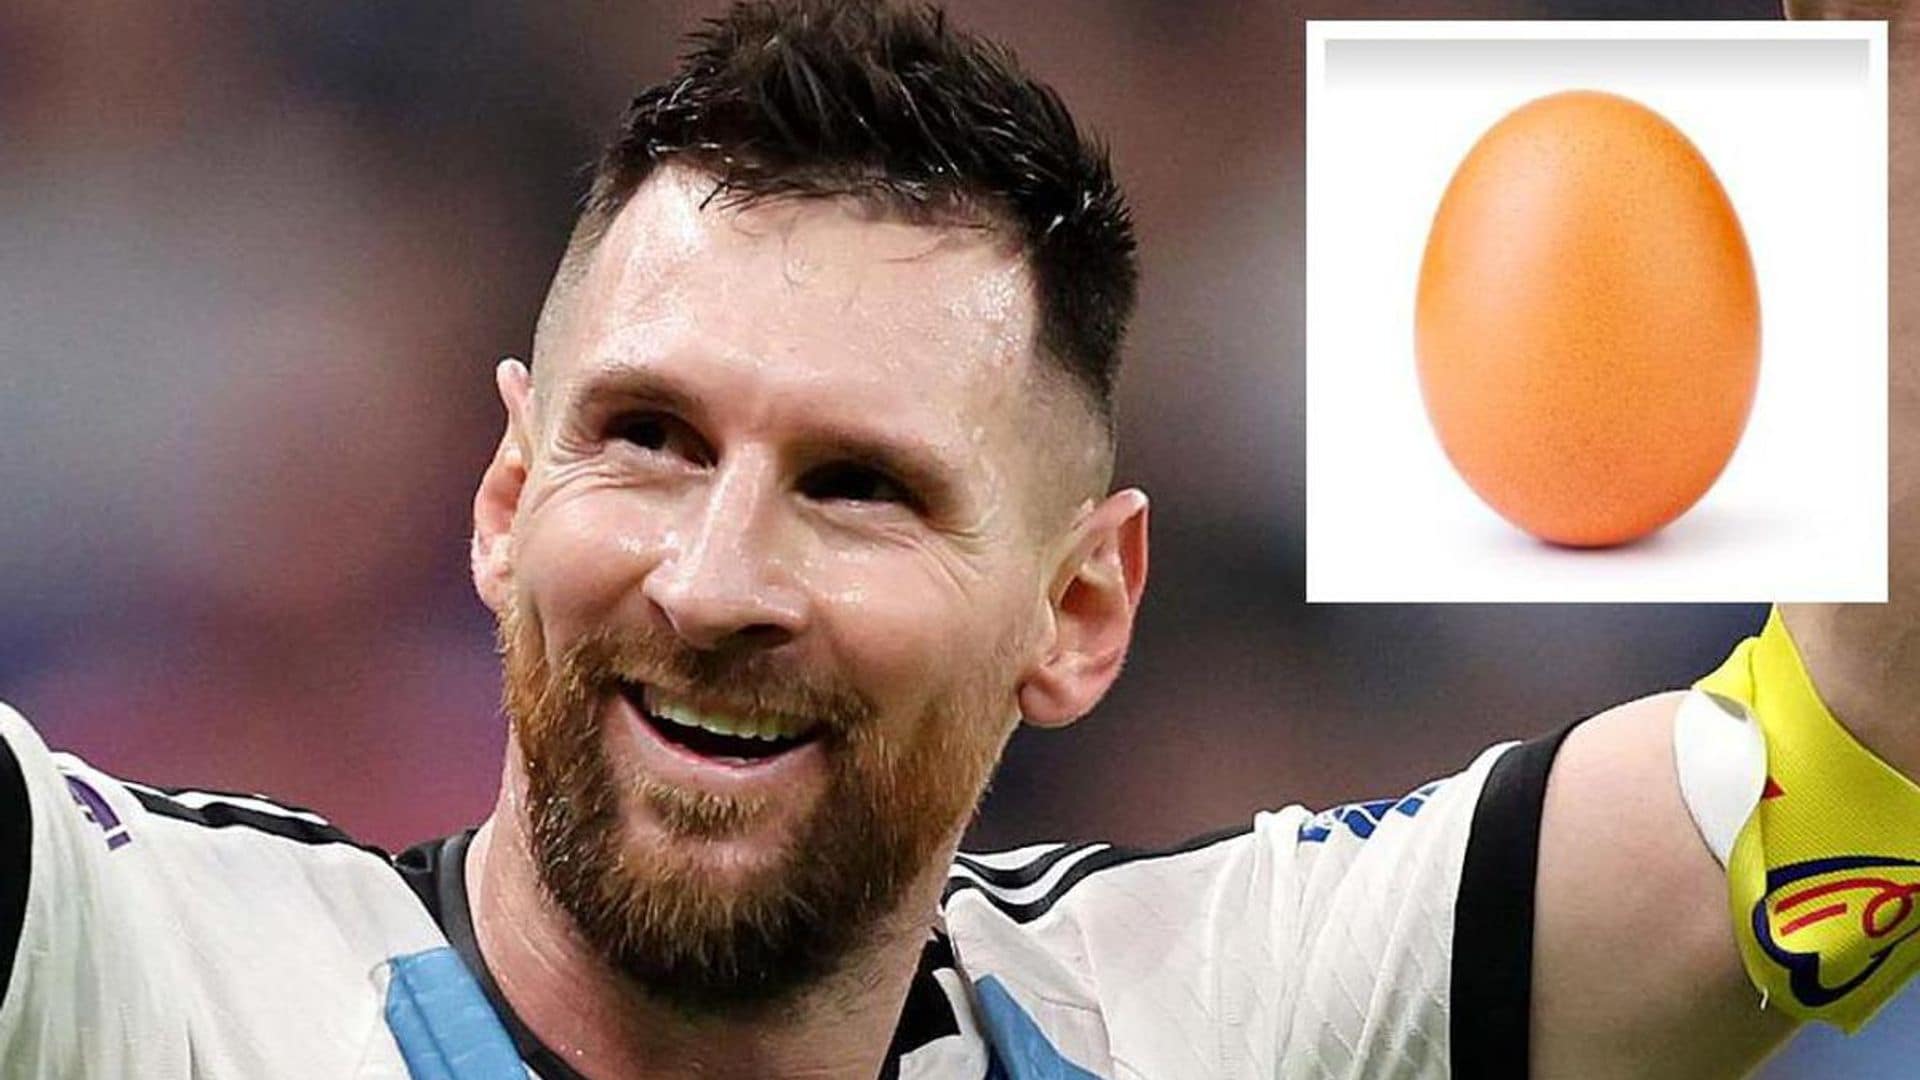 Lionel Messi beats the world record egg for the most-liked post on Instagram